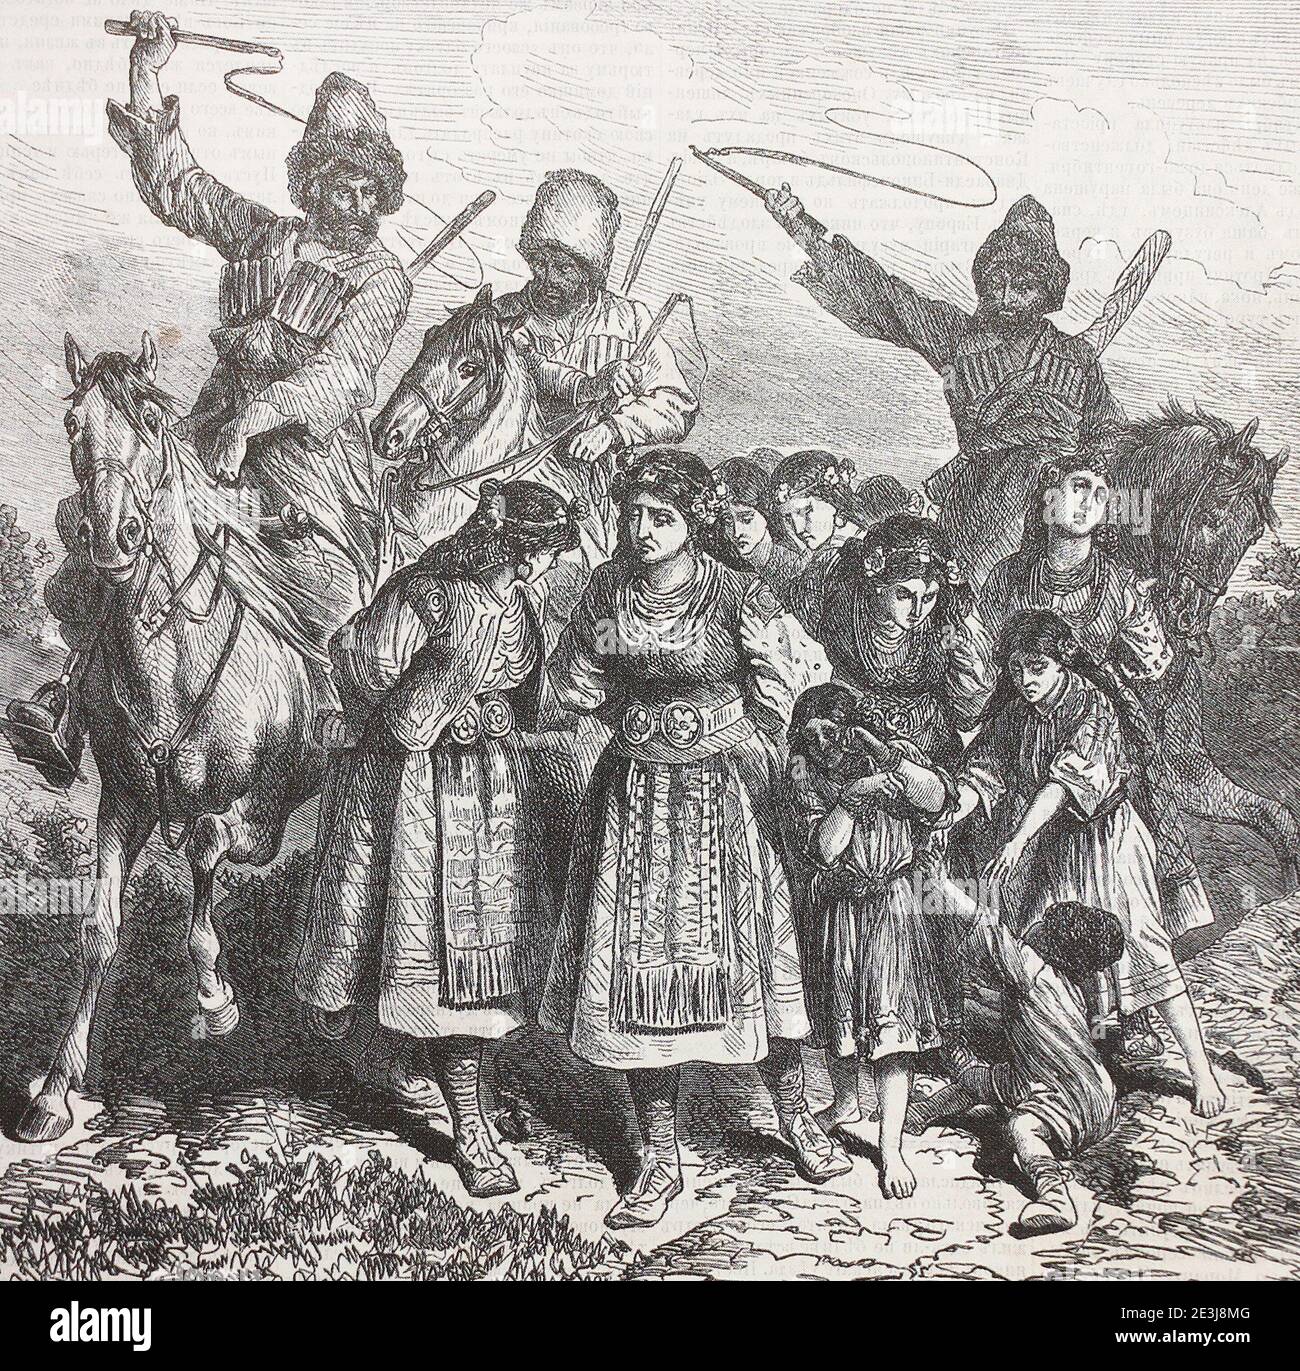 The Circassians send Bulgarian girls captured by them for sale. Engraving 1876. Stock Photo